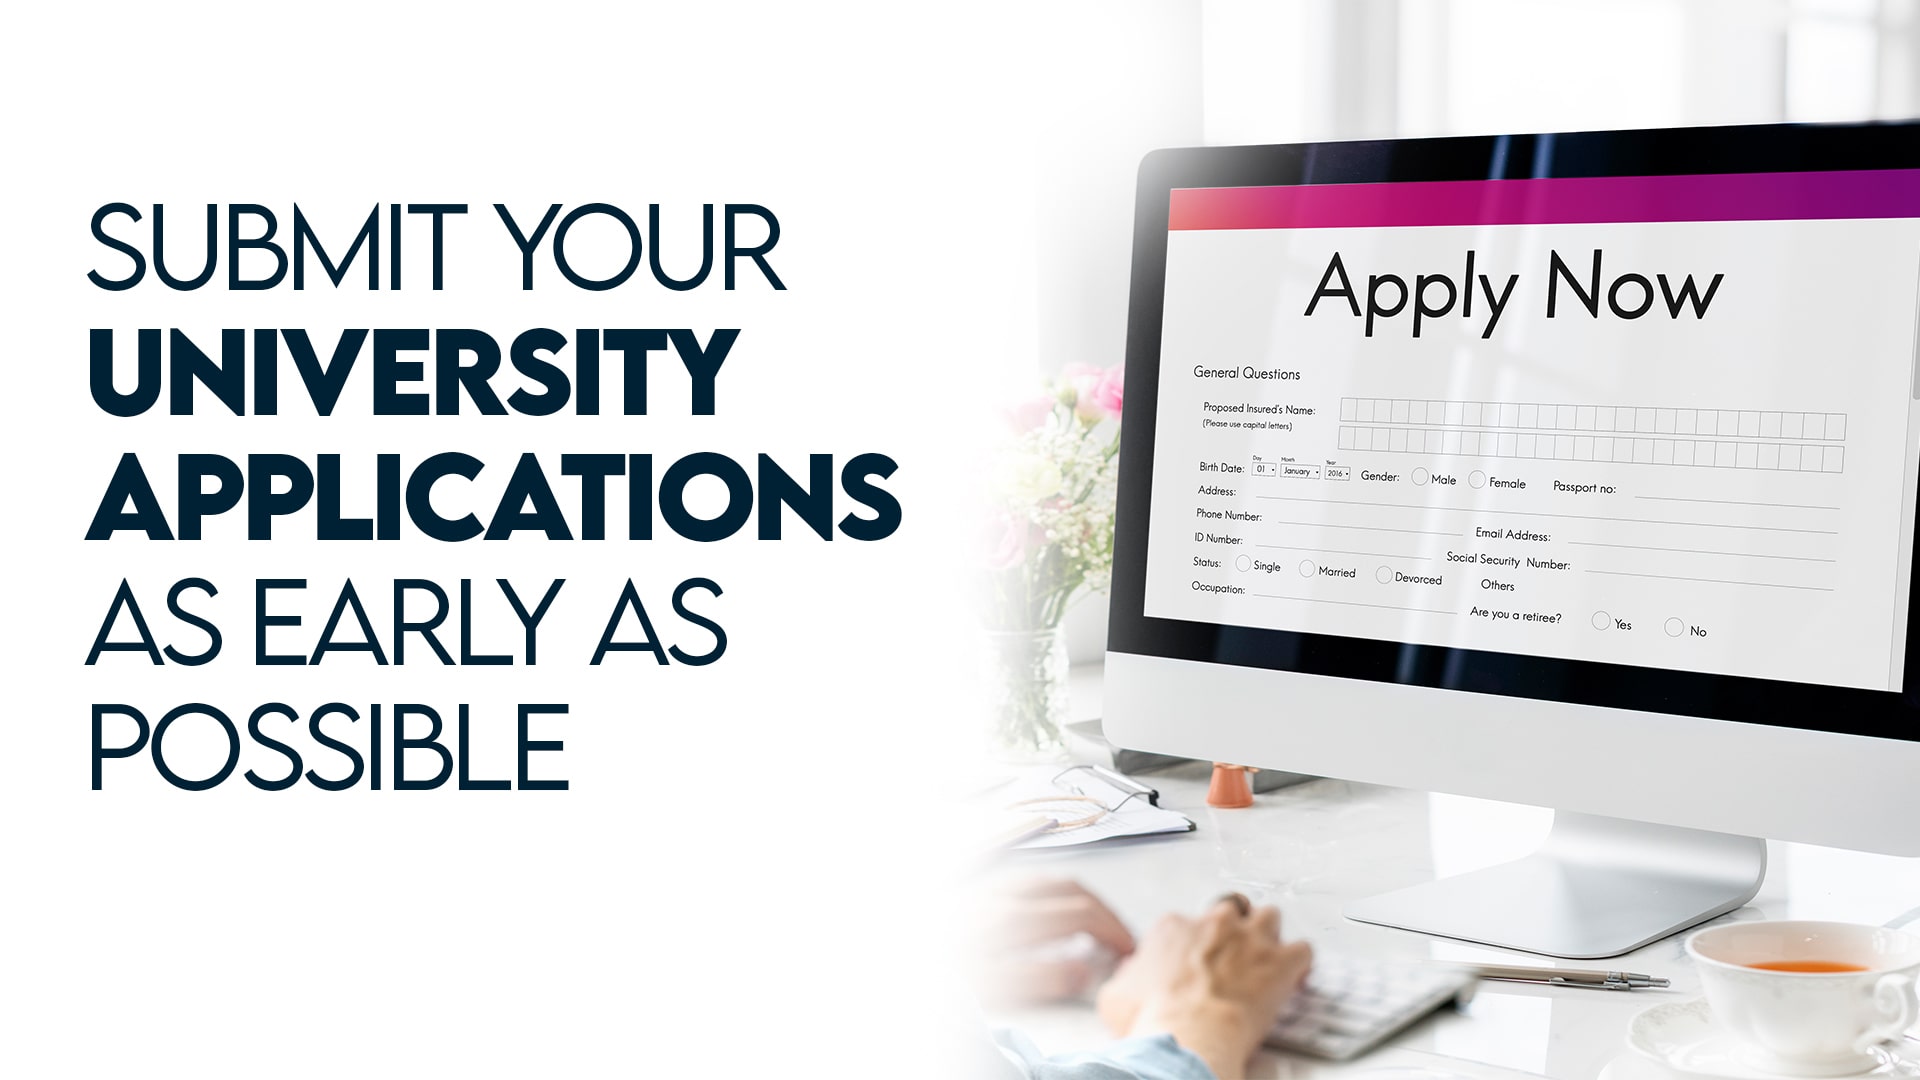 Submit your university application as early as possible